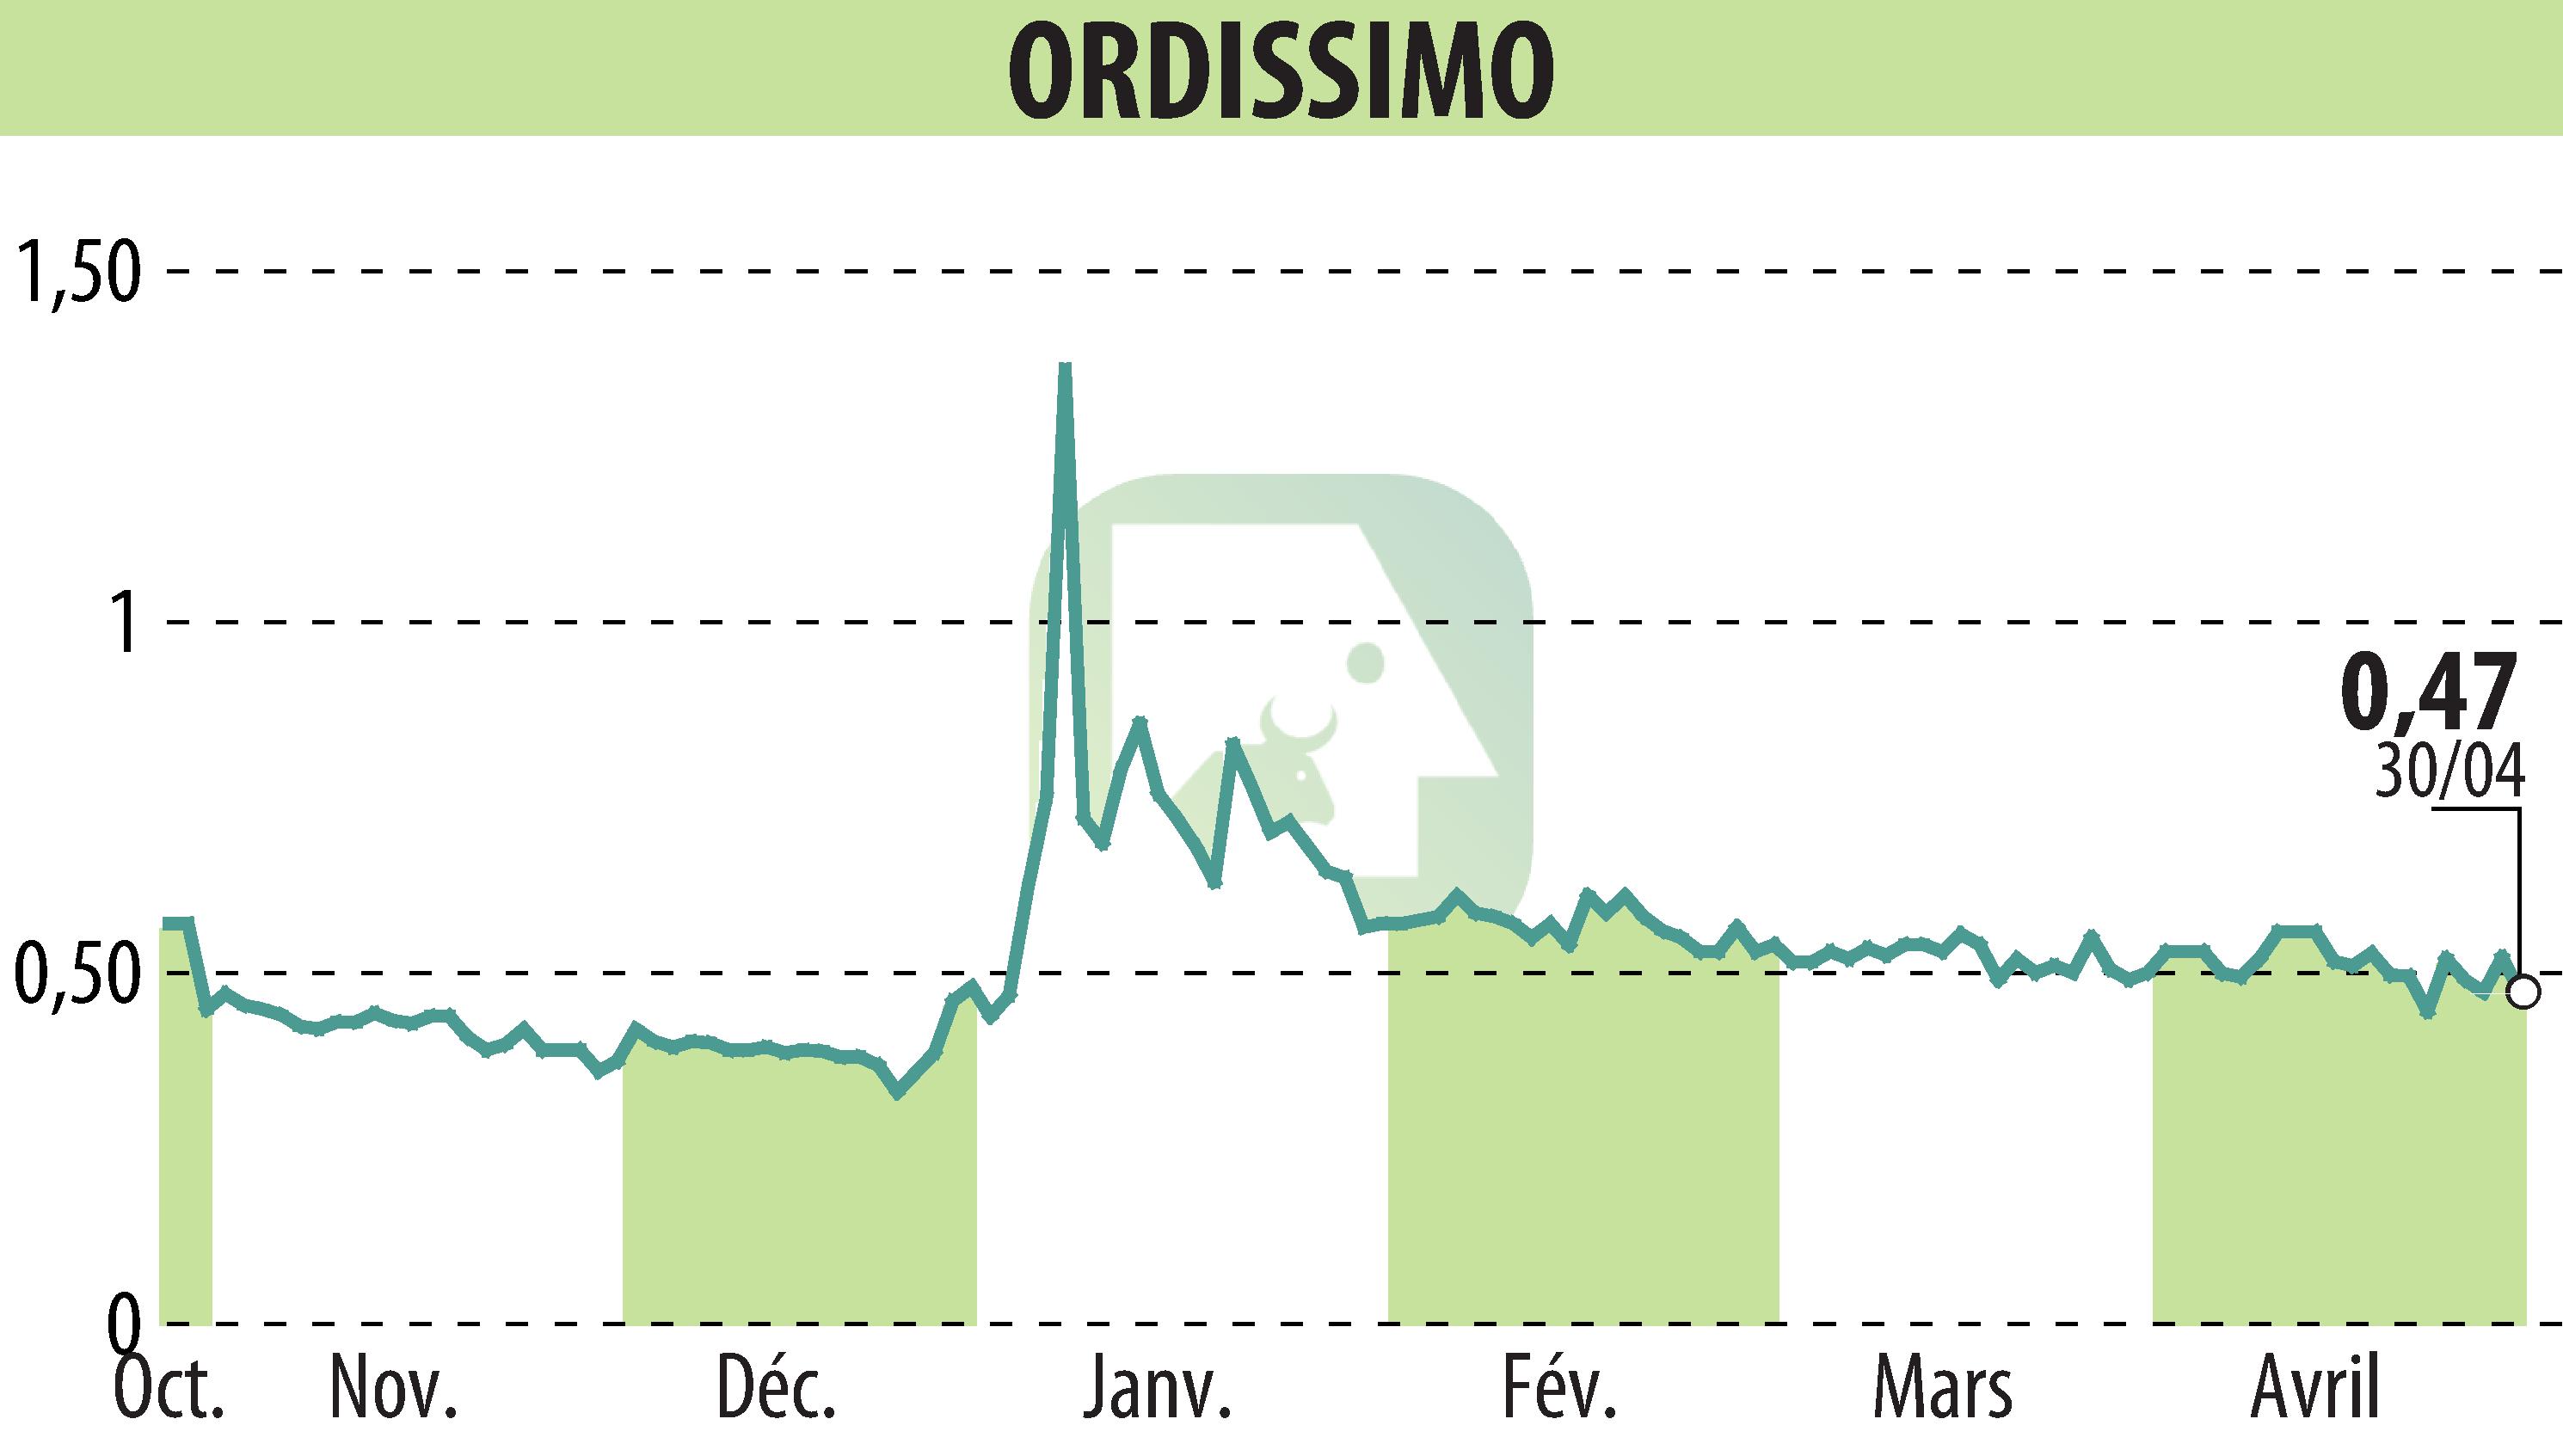 Stock price chart of ORDISSIMO (EPA:ALORD) showing fluctuations.